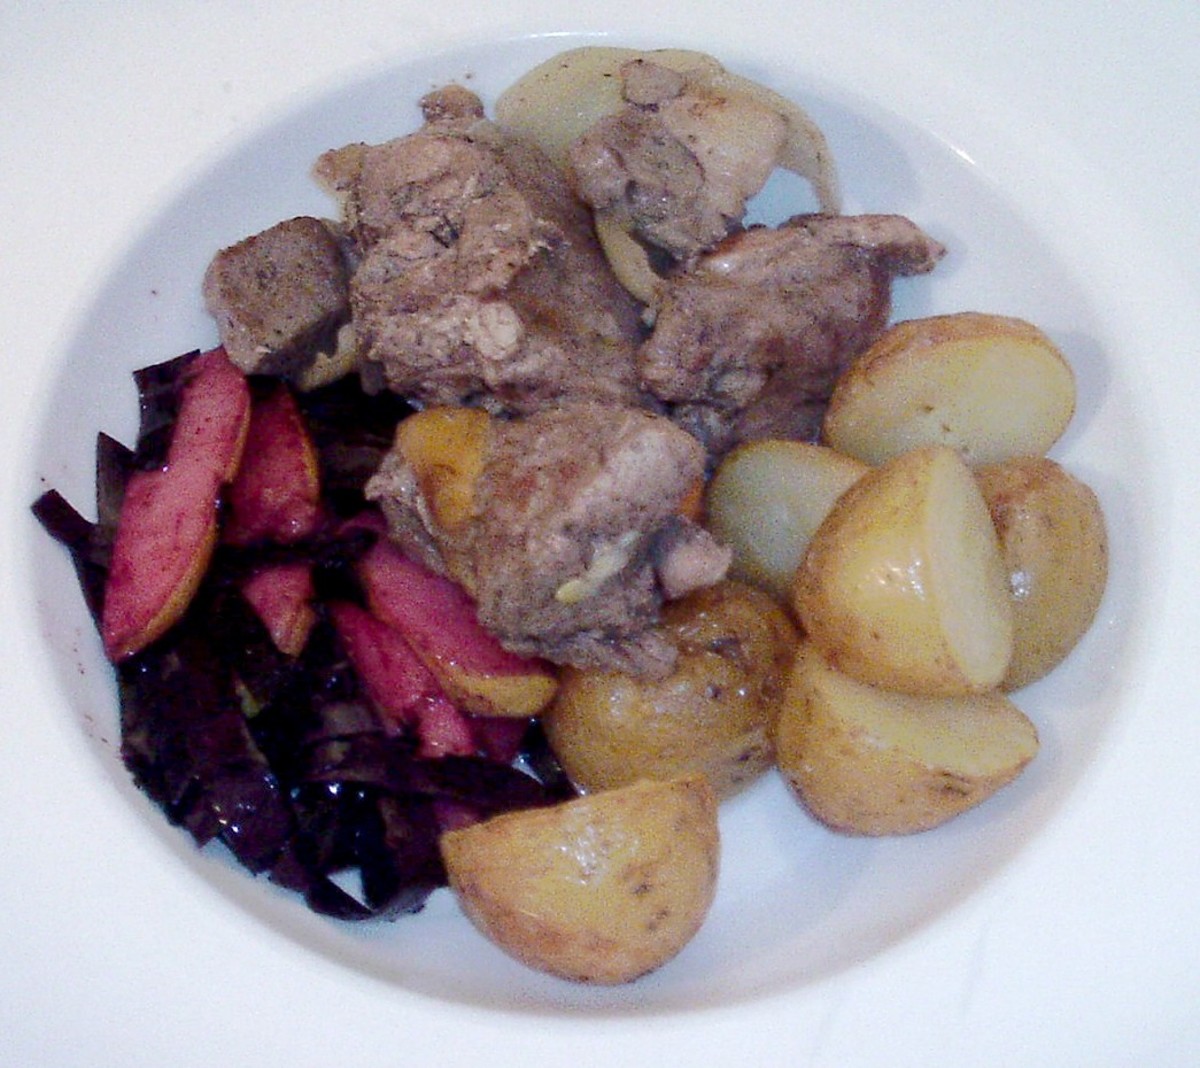 Pheasant and lamb stew is plated with roast potatoes, red cabbage and pear